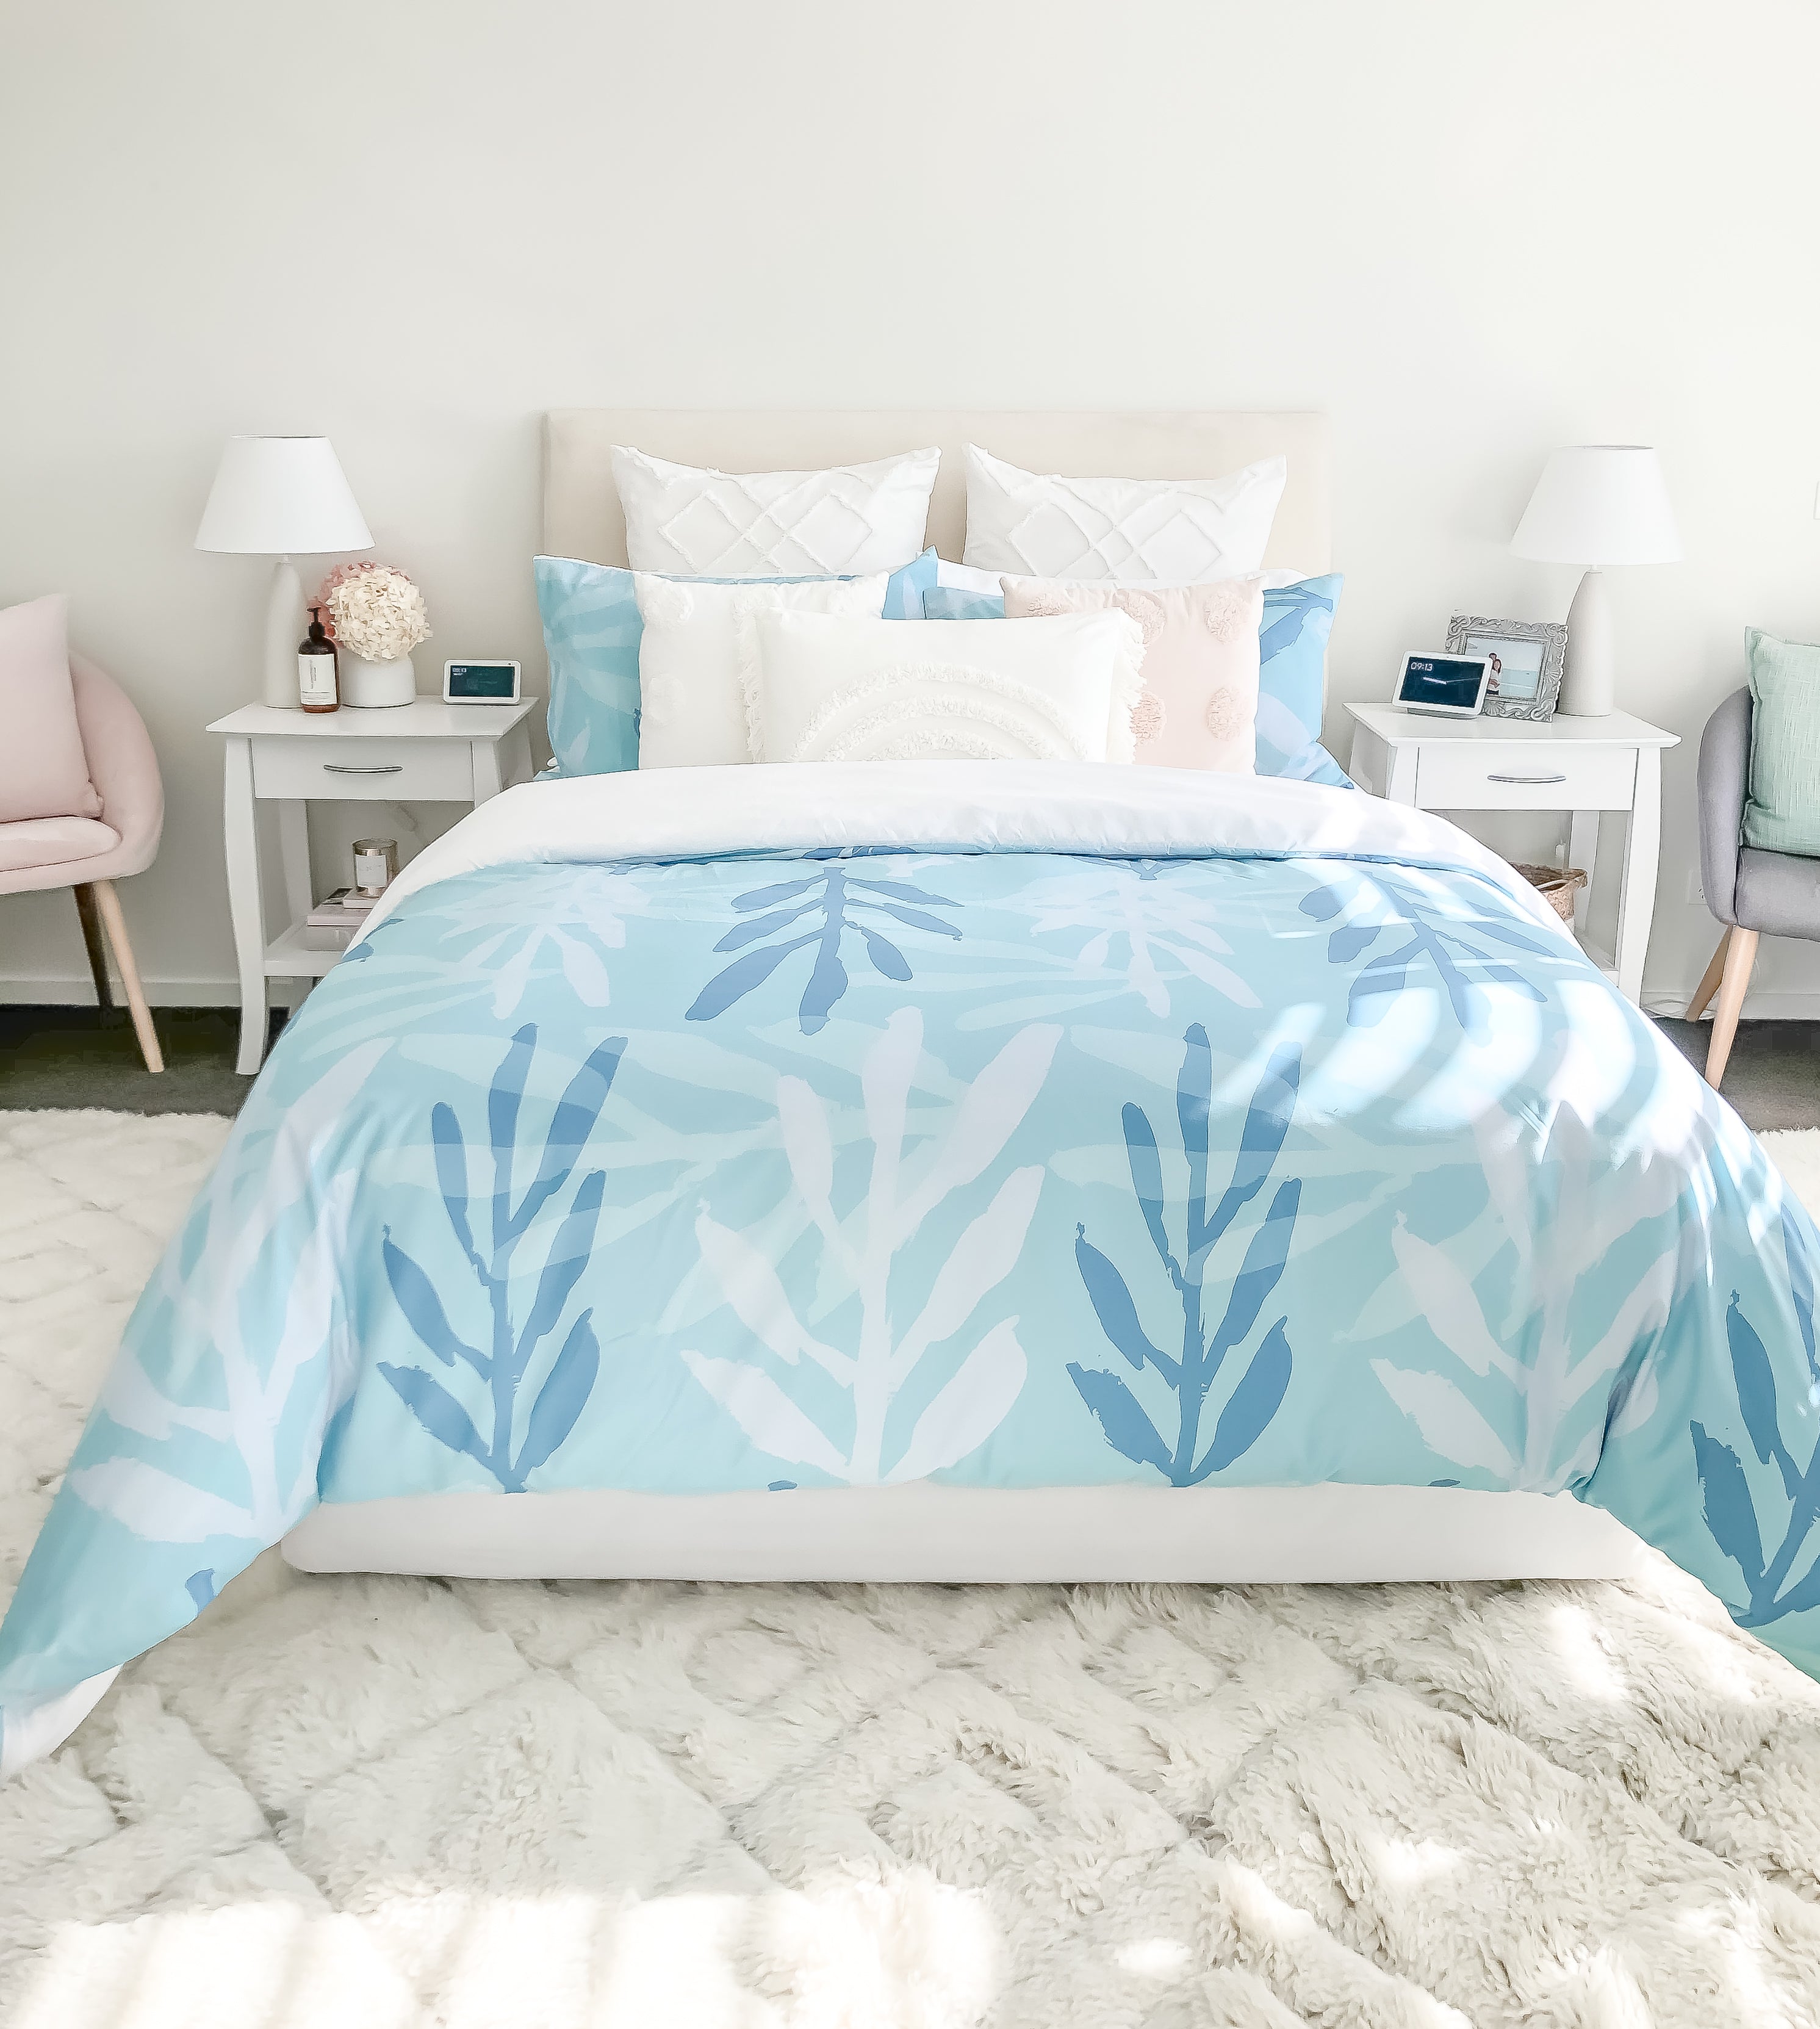 A light filled bedroom with the Botanica quilt cover in Blue on a queen sized bed. There are complimenting display pillows in mix of soft pastel colours.